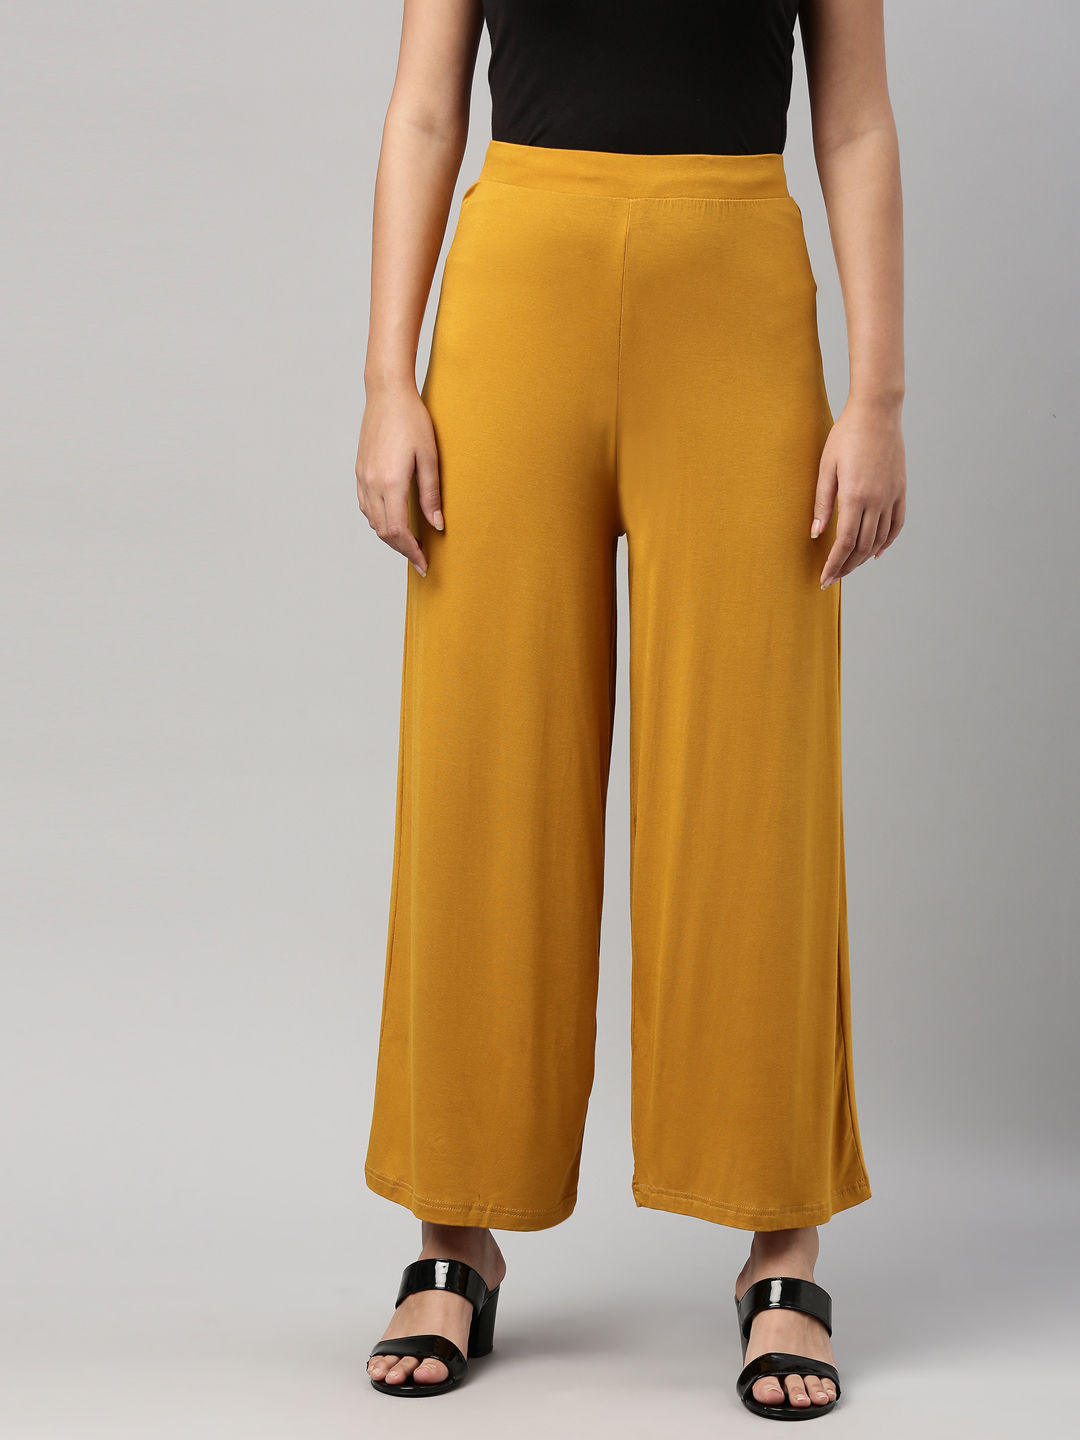 Buy Yellow Palazzo Pant Cotton Silk for Best Price Reviews Free Shipping